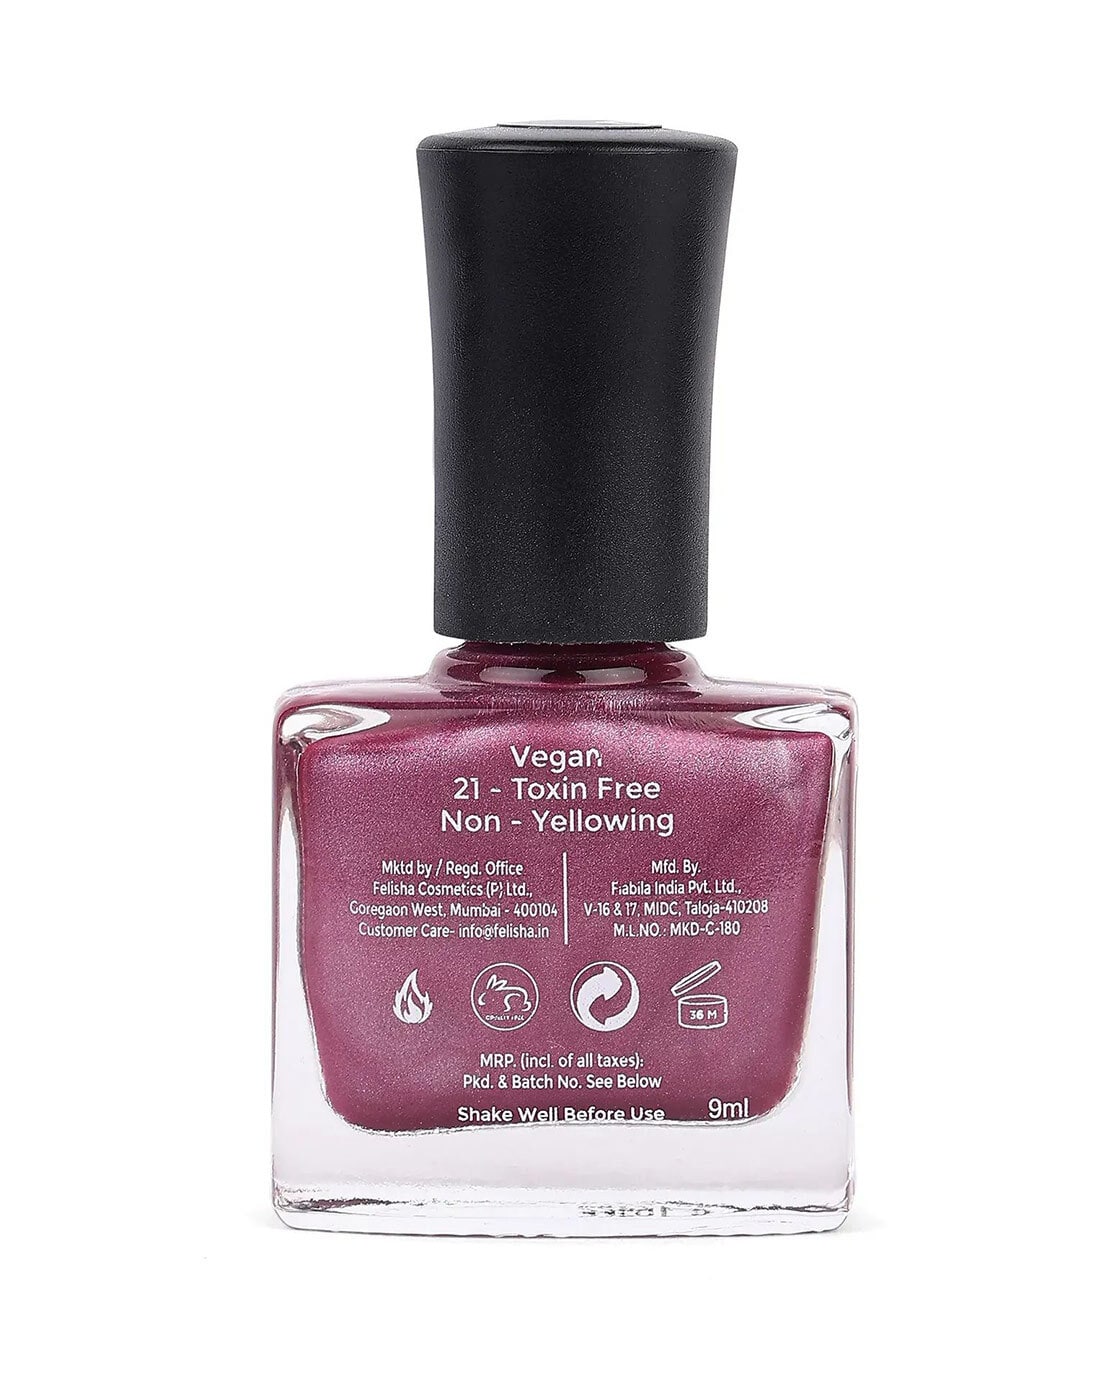 Colorbar Vegan Nail Paint (Mistress 266) Price - Buy Online at ₹170 in India